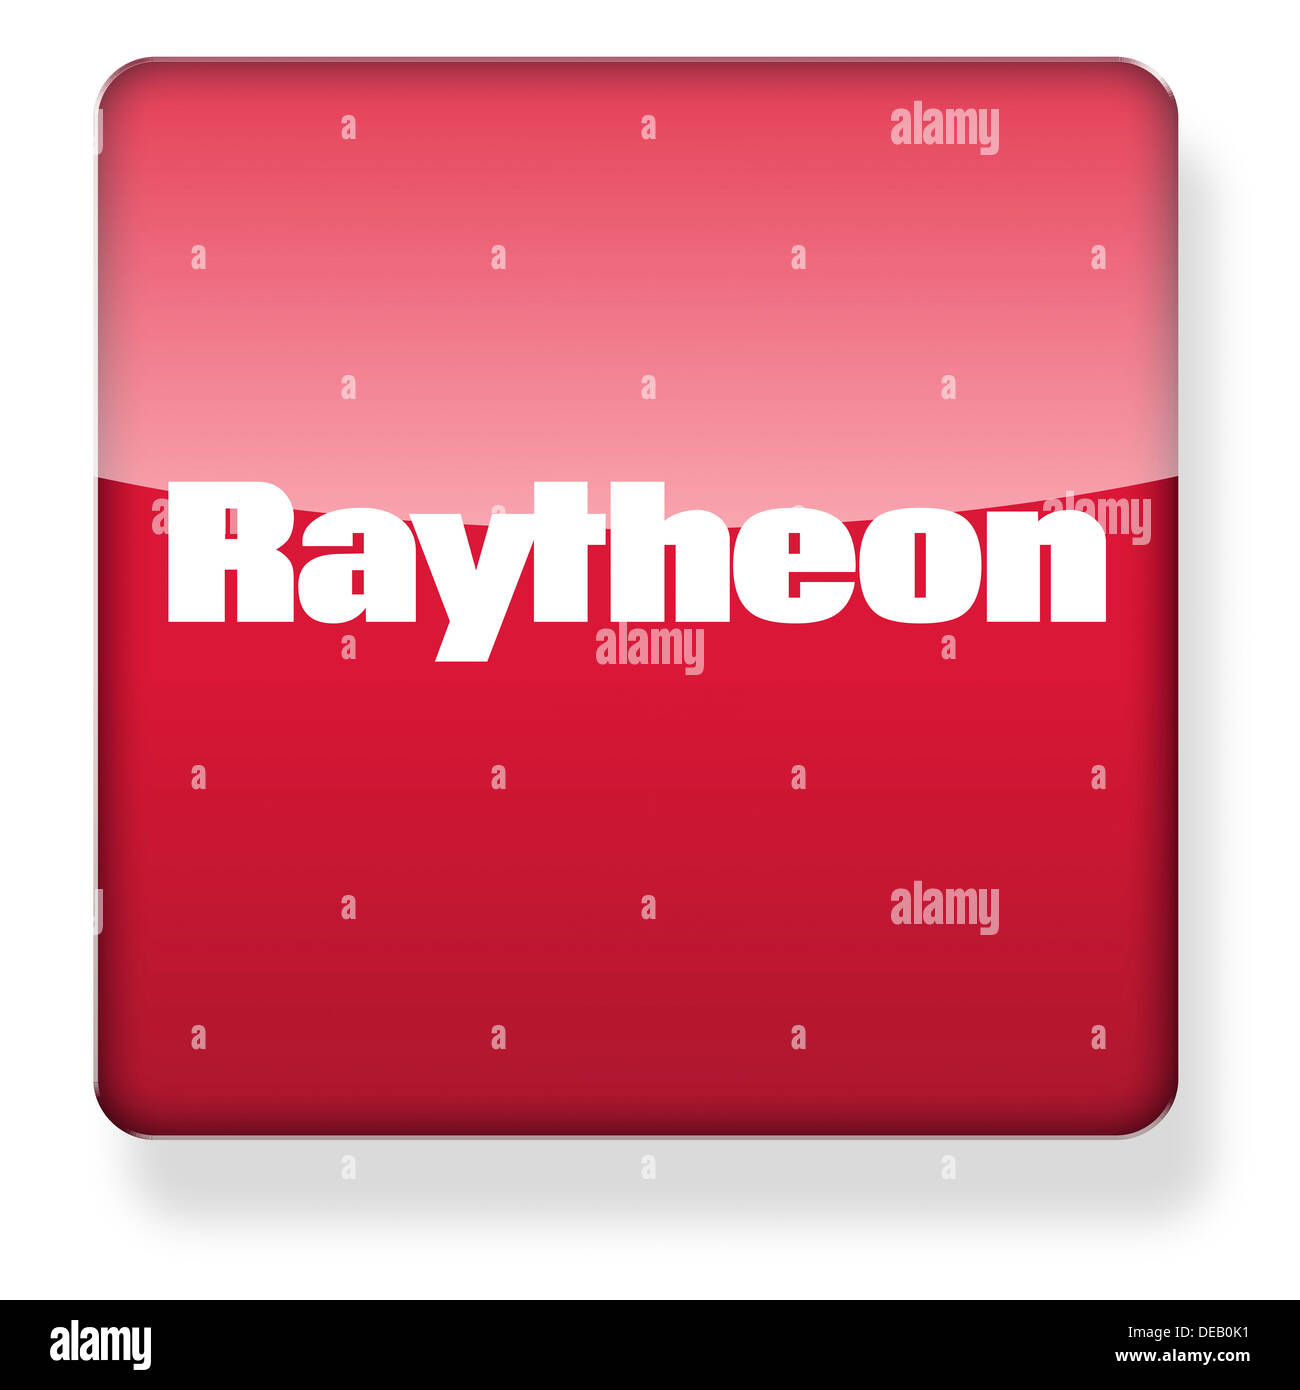 Raytheon logo as an app icon. Clipping path included. Stock Photo